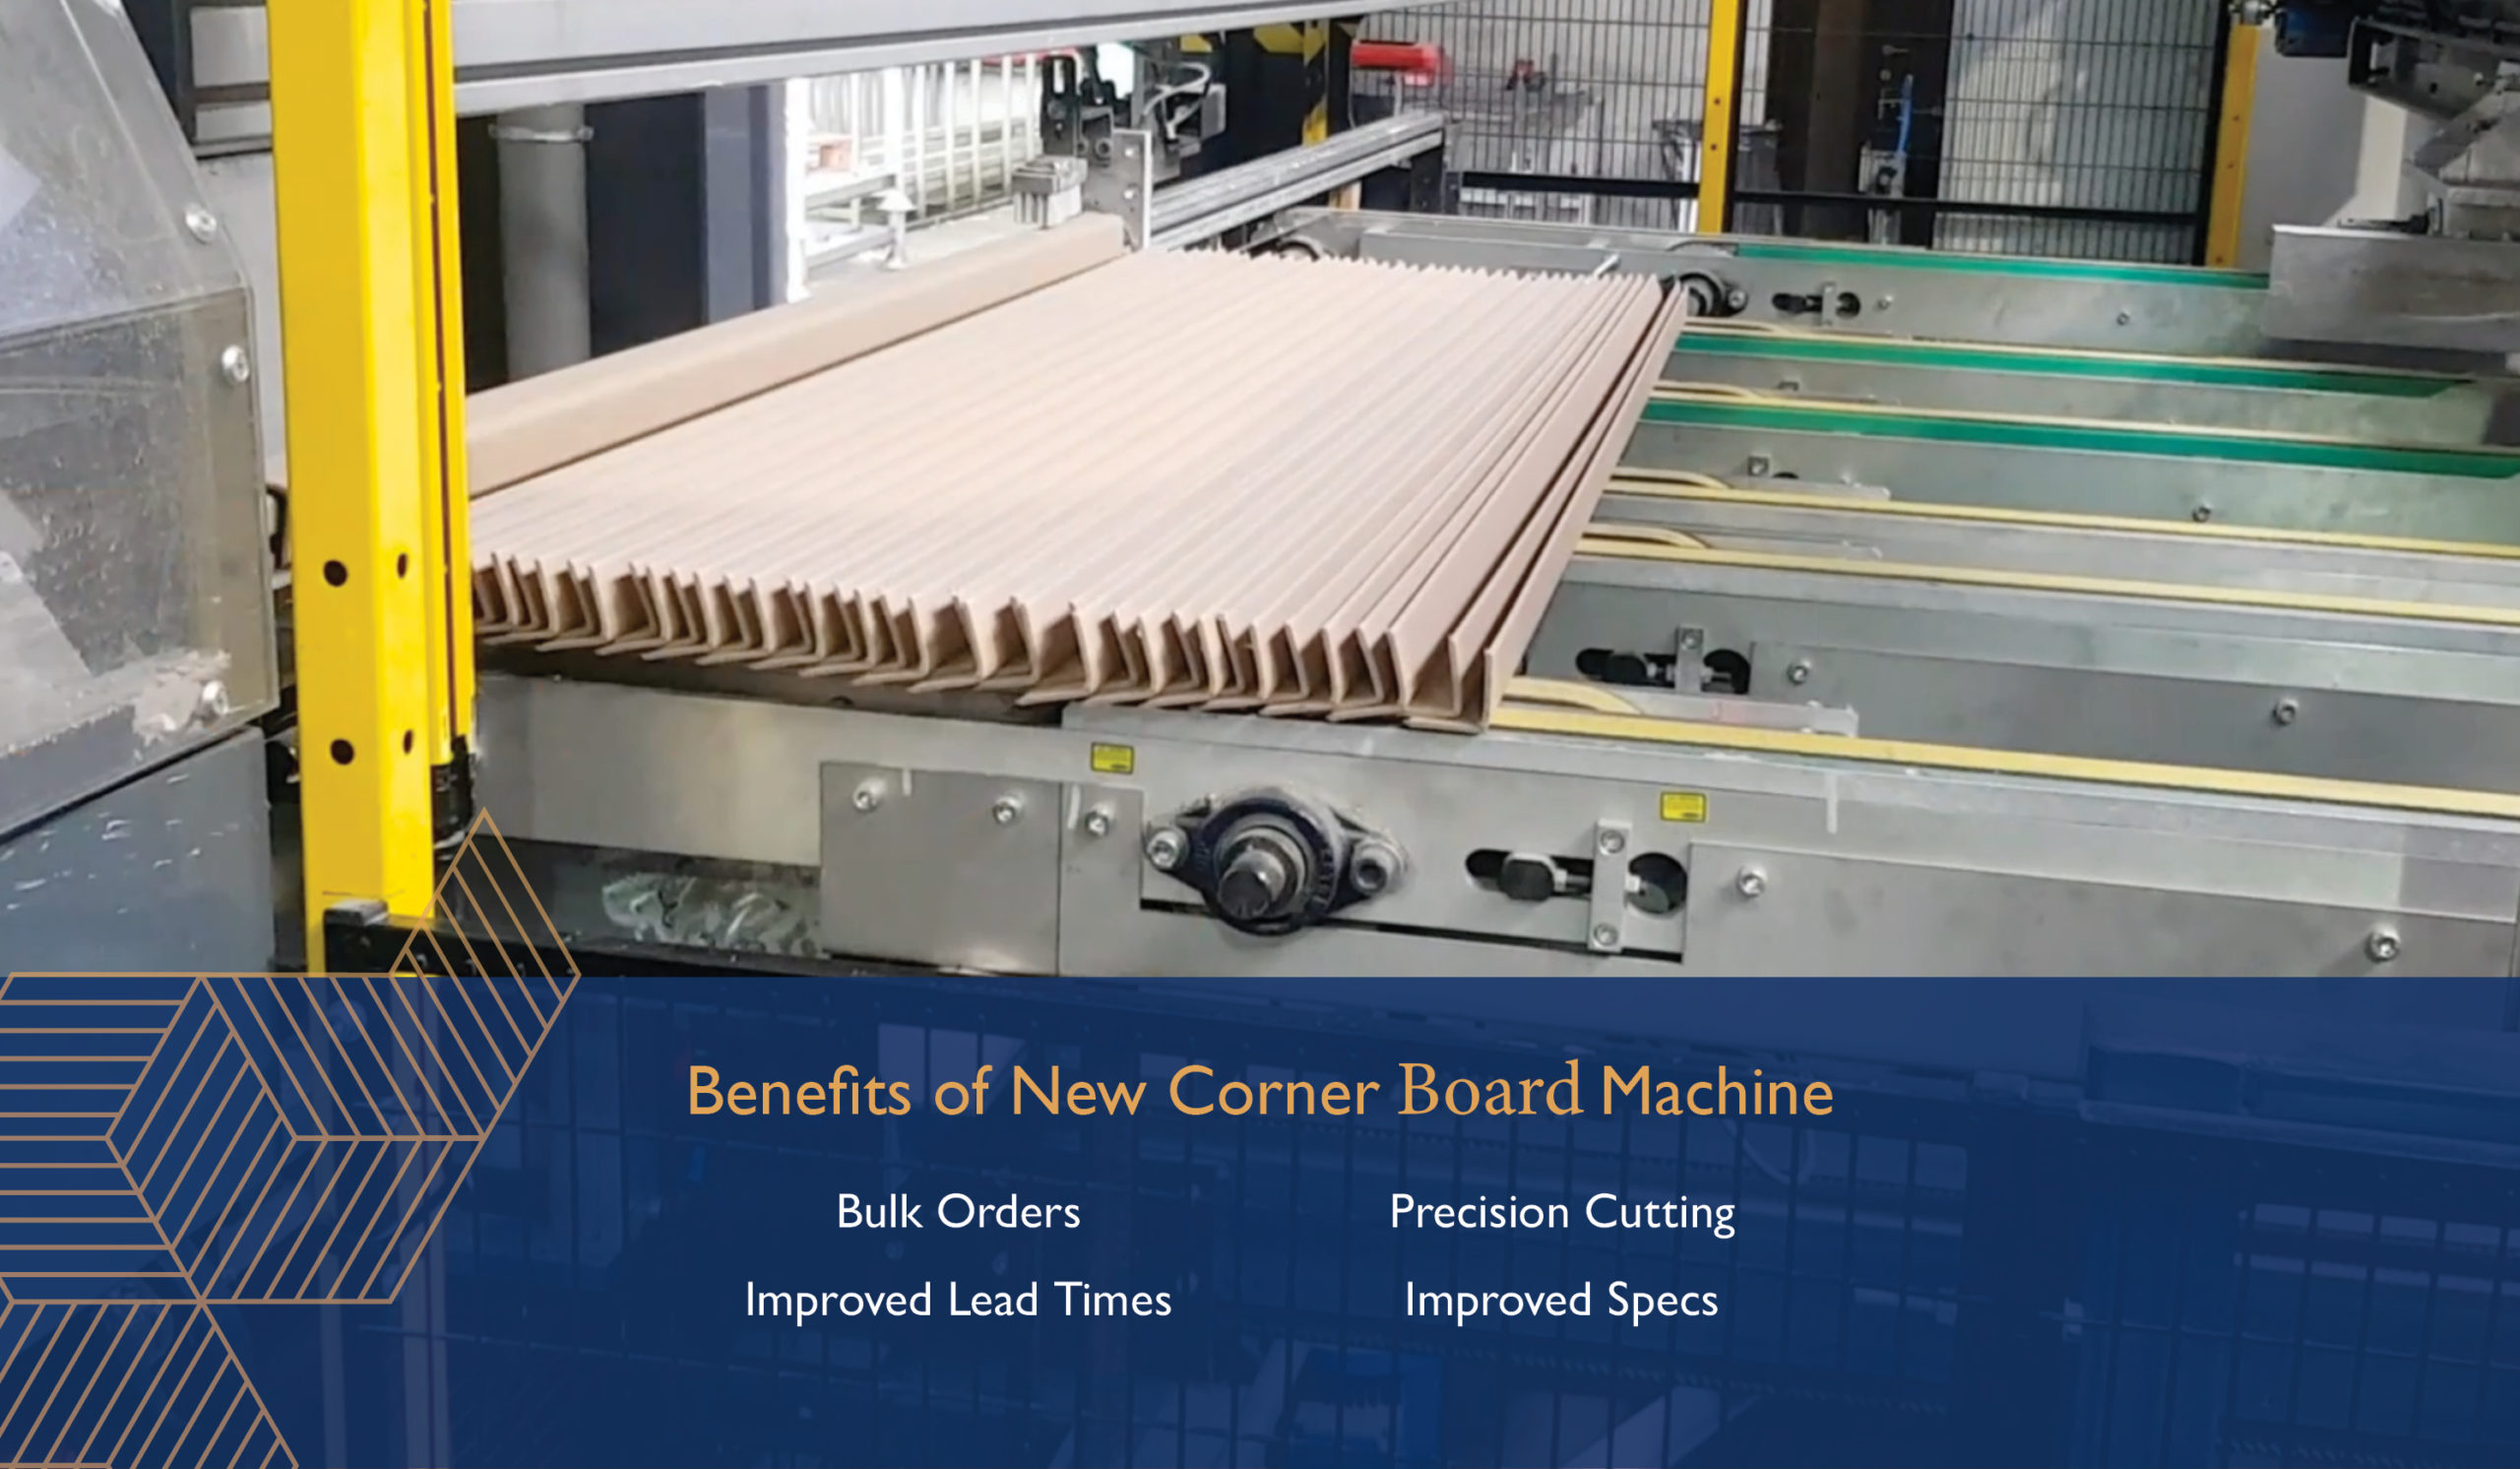 Benefits of New Corner Board Machine: Bulk Orders. Improved Lead Times. Precision Cutting. Improved Specs.